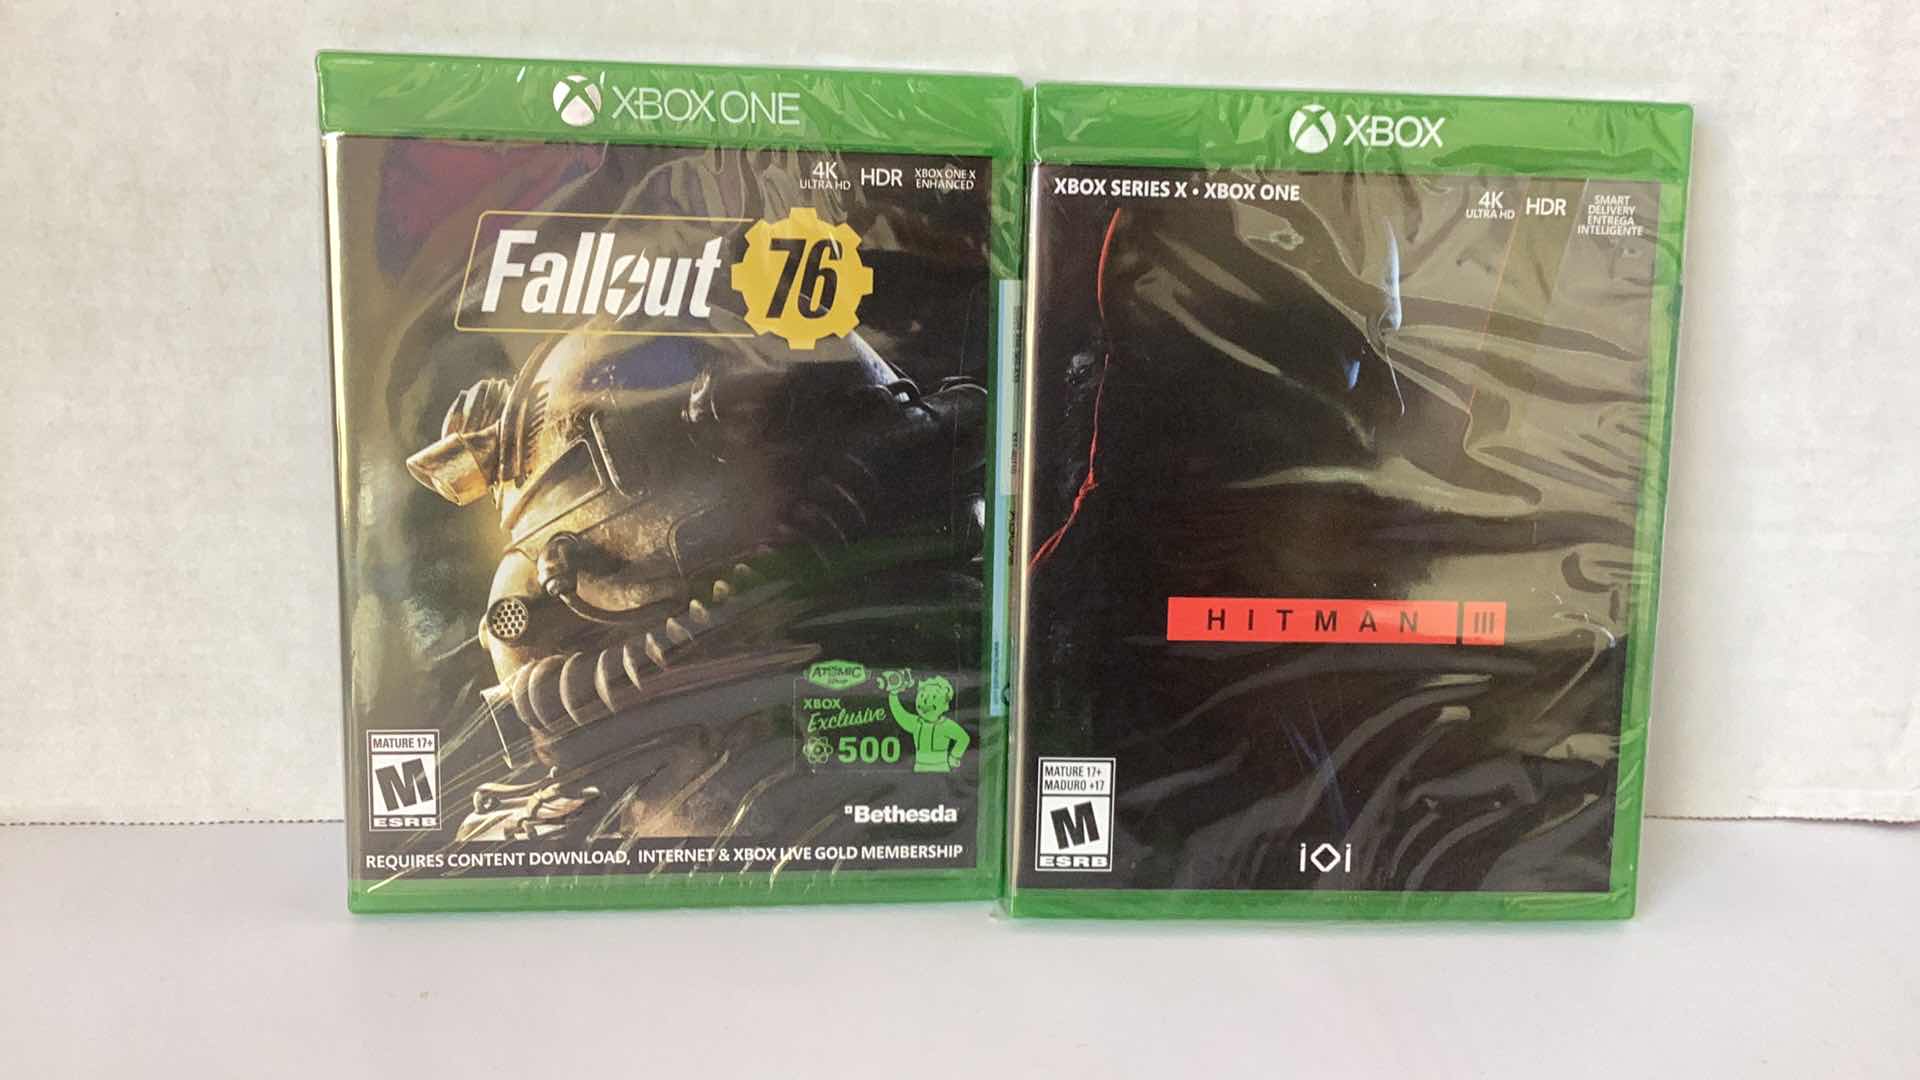 Photo 1 of 2 NEW X-BOX GAMES: FALLOUT 76 AND HITMAN III